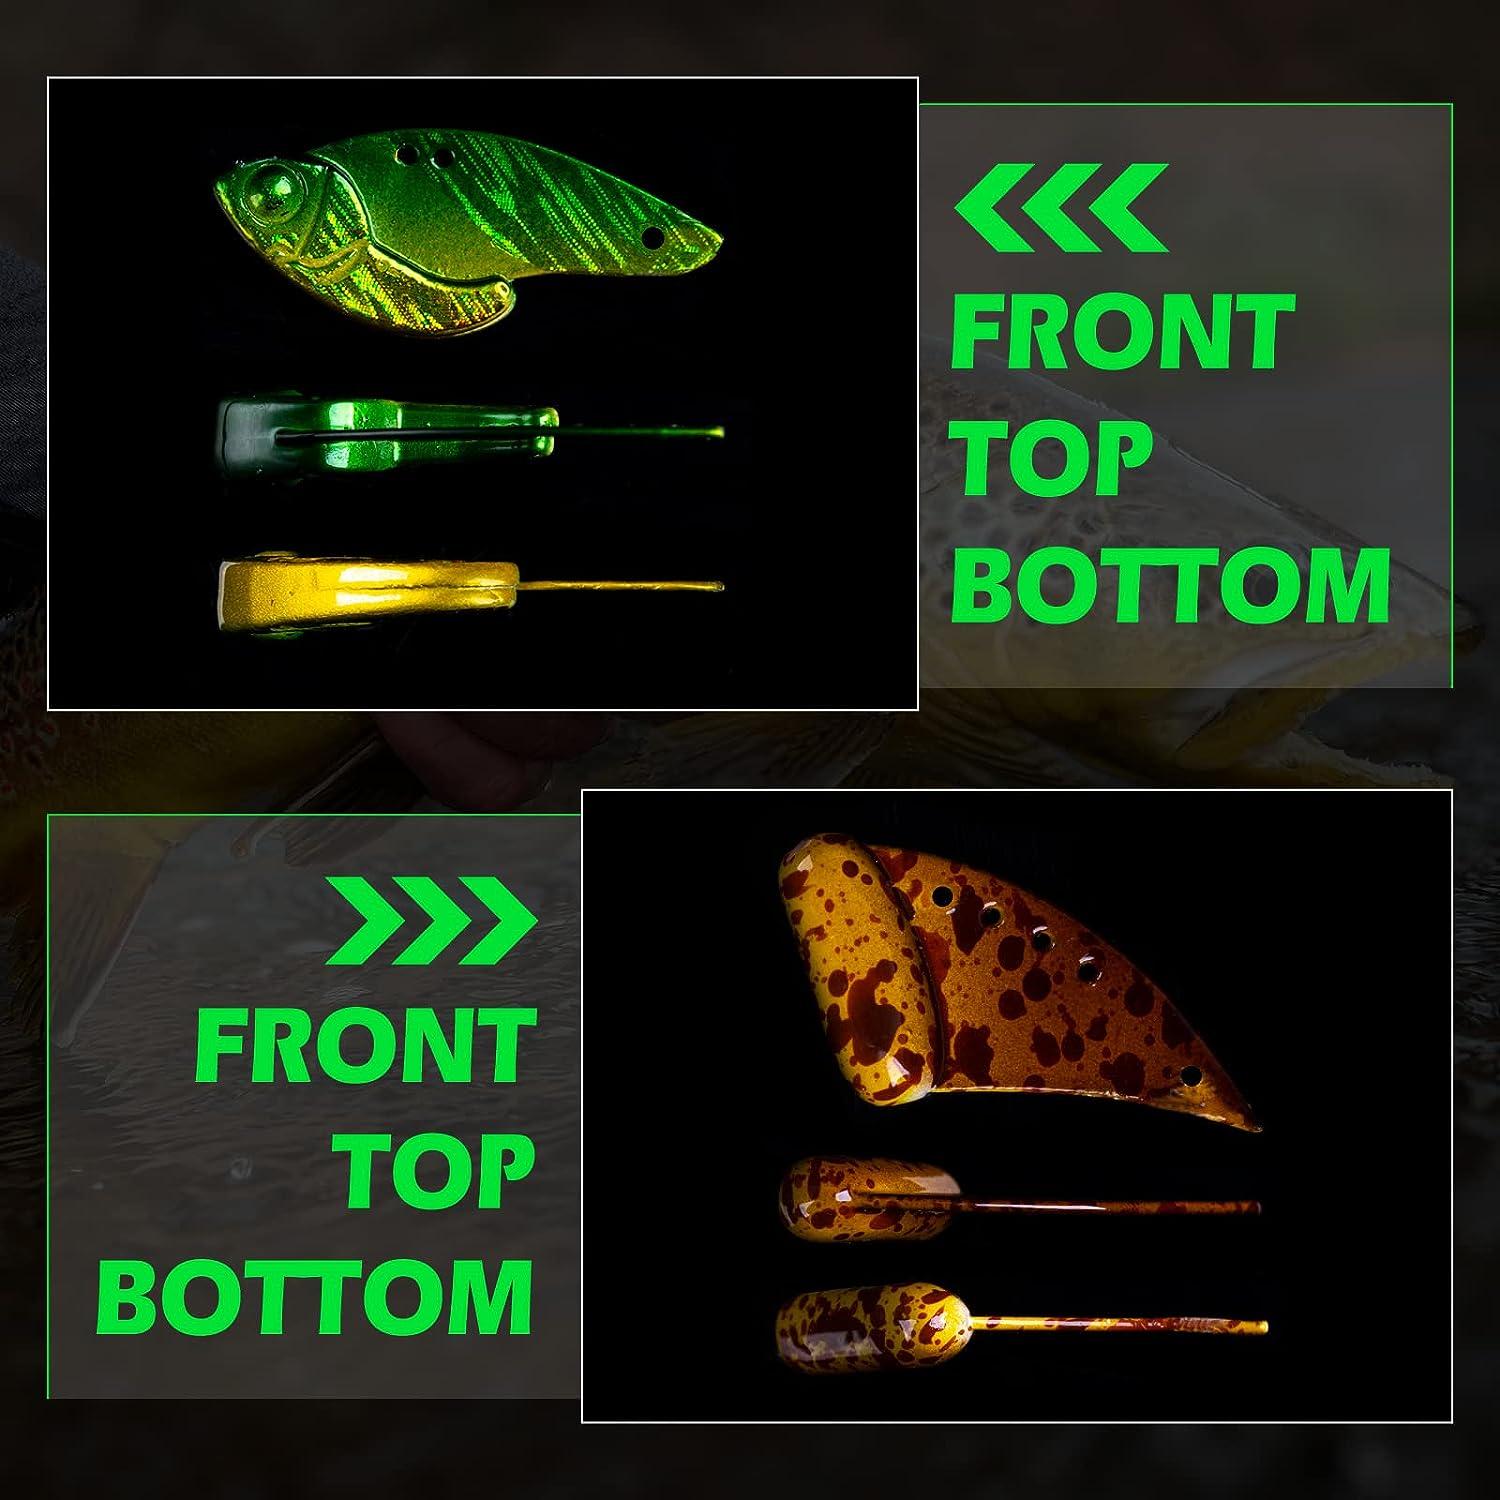 12Pcs Winter Ice Fishing Lure ice jigs for Crappie Bass Panfish